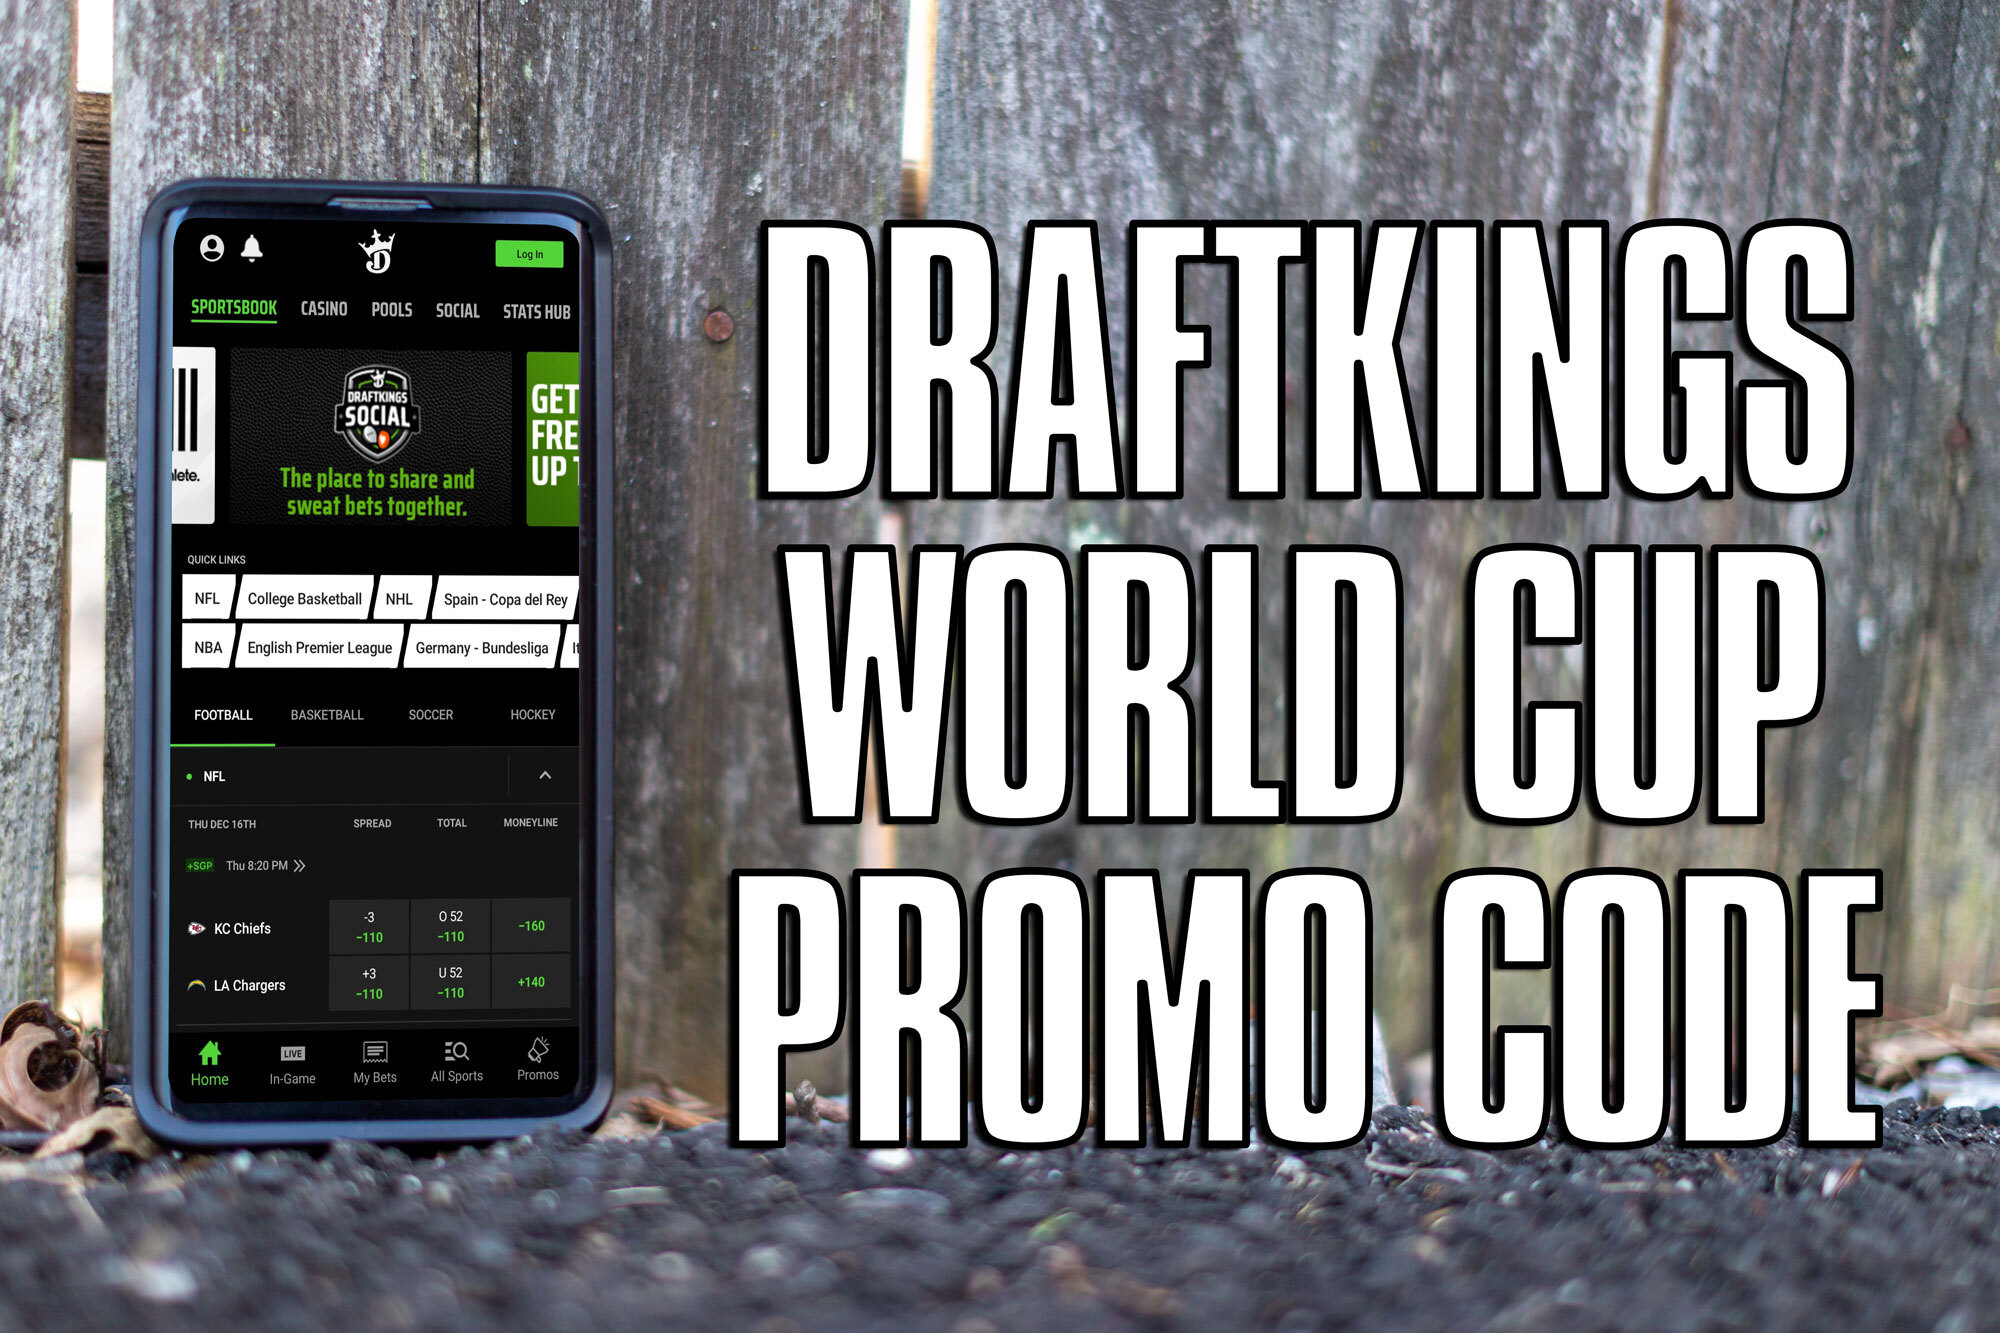 DraftKings World Cup Promo Code